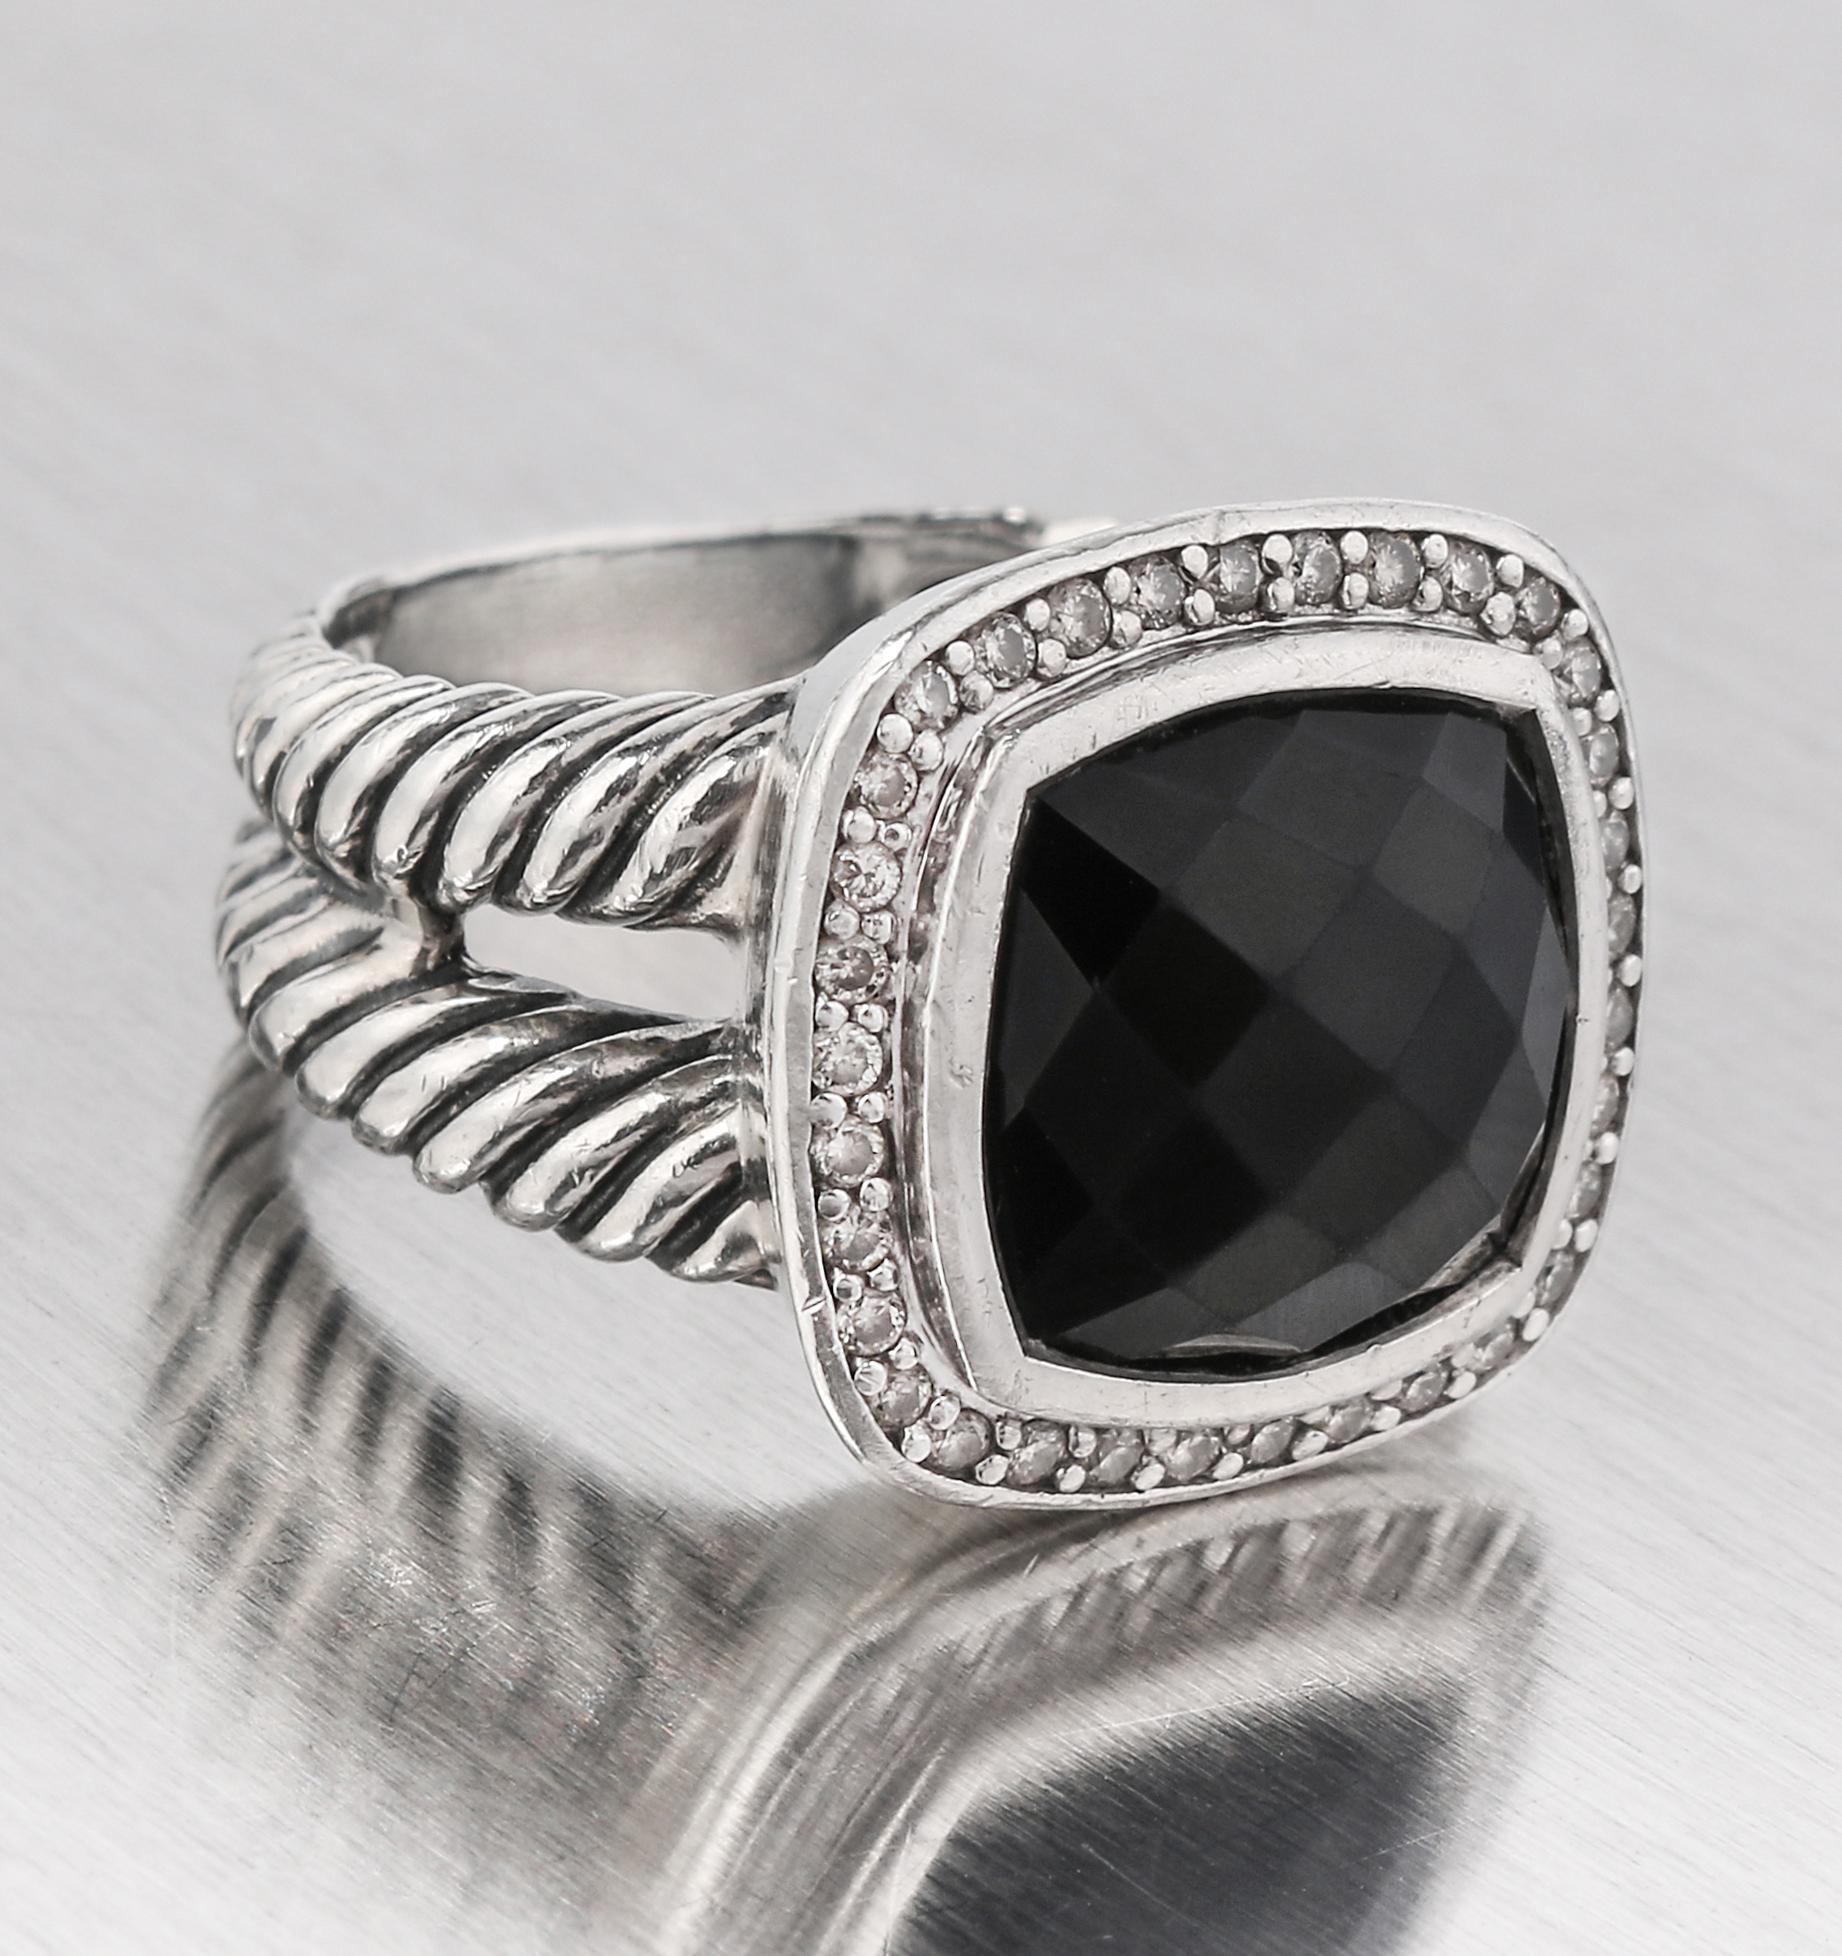 David Yurman Albion Ring. Sterling silver cable split-shank. Checkerboard faceted 11mm black onyx surrounded by bezel set pave diamonds. Marked with signature 